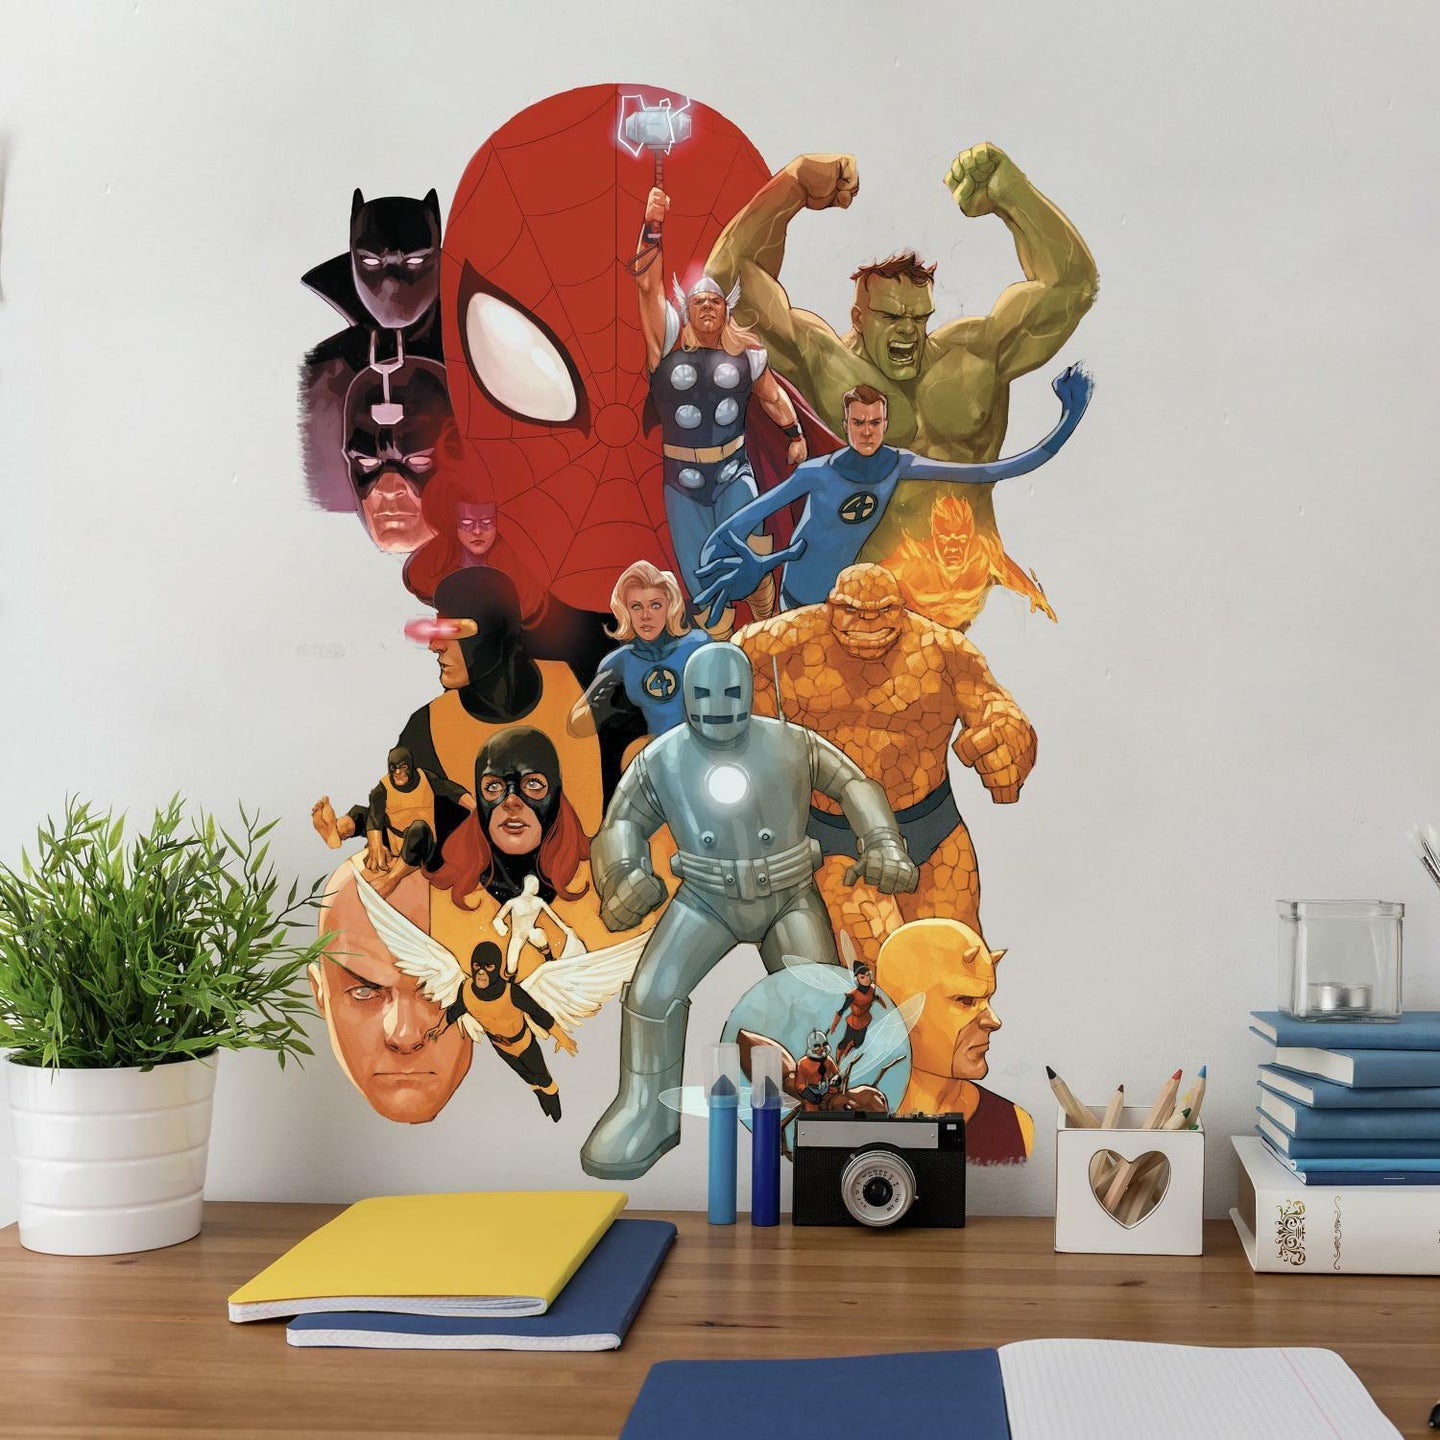 MARVEL AVENGERS CLASSIC PEEL AND STICK GIANT WALL DECALS